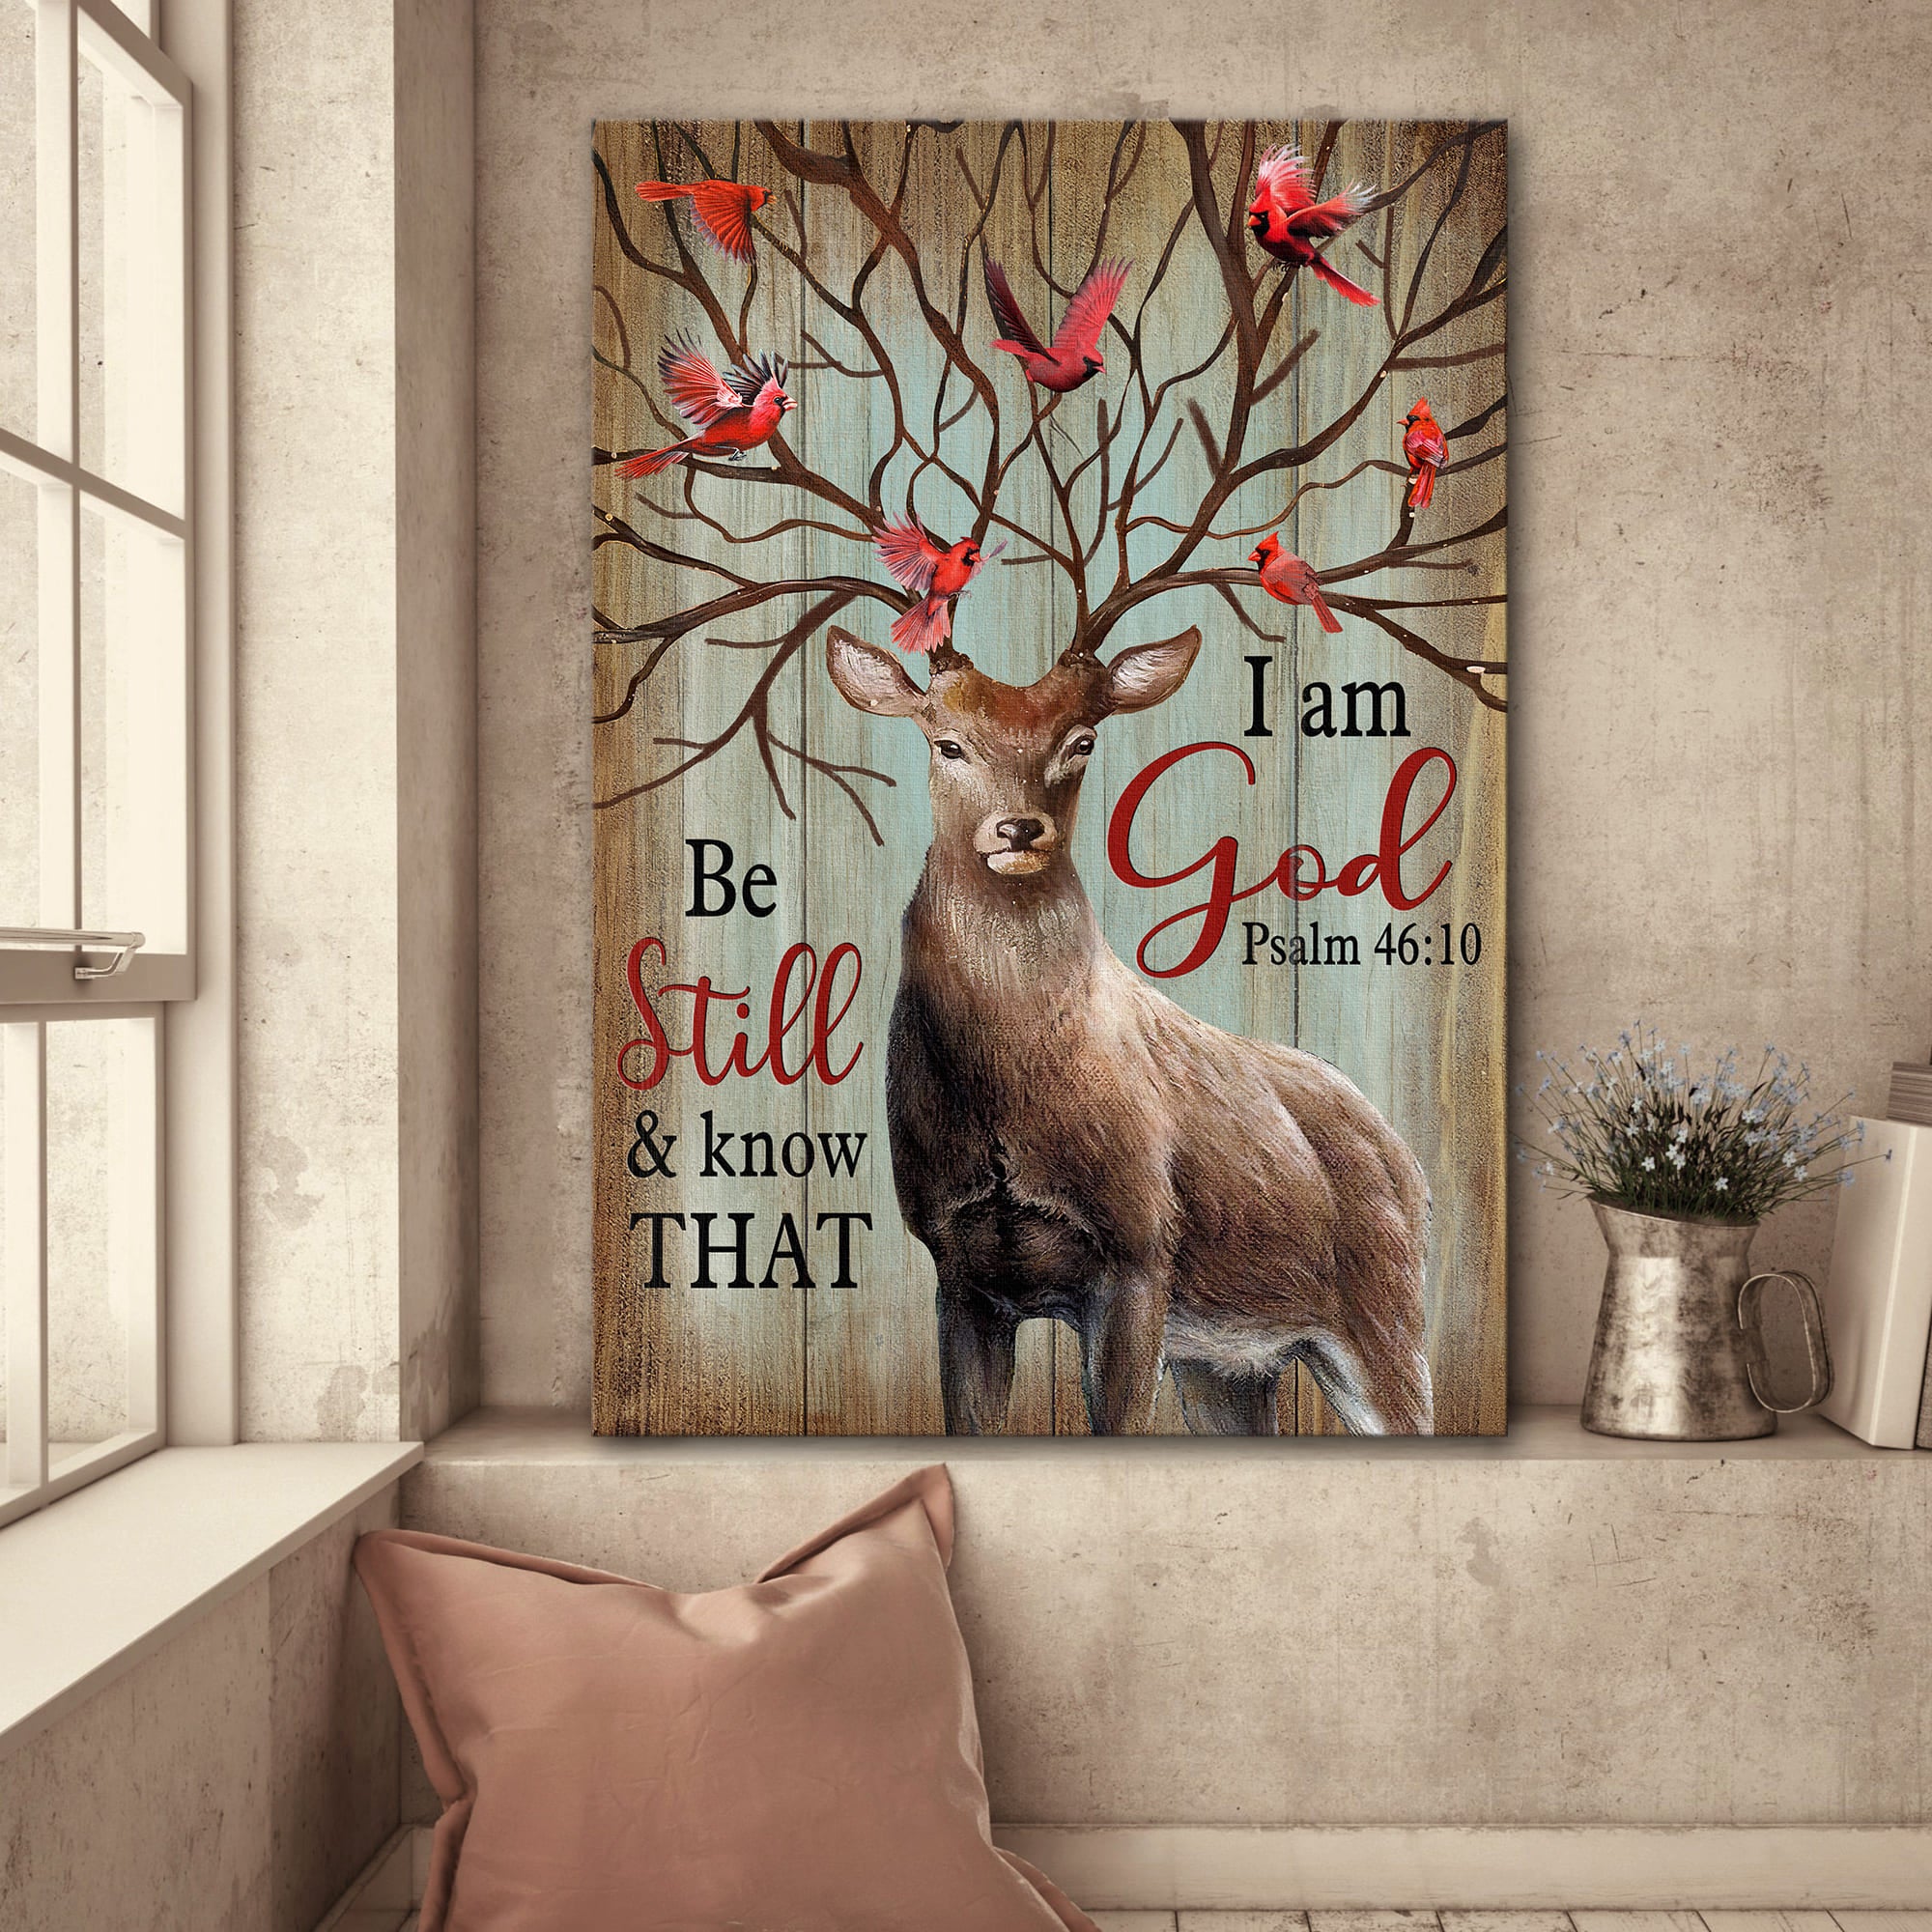 Deer, Cardinal, Be still and know that I am God - Jesus Portrait Canvas Prints, Wall Art